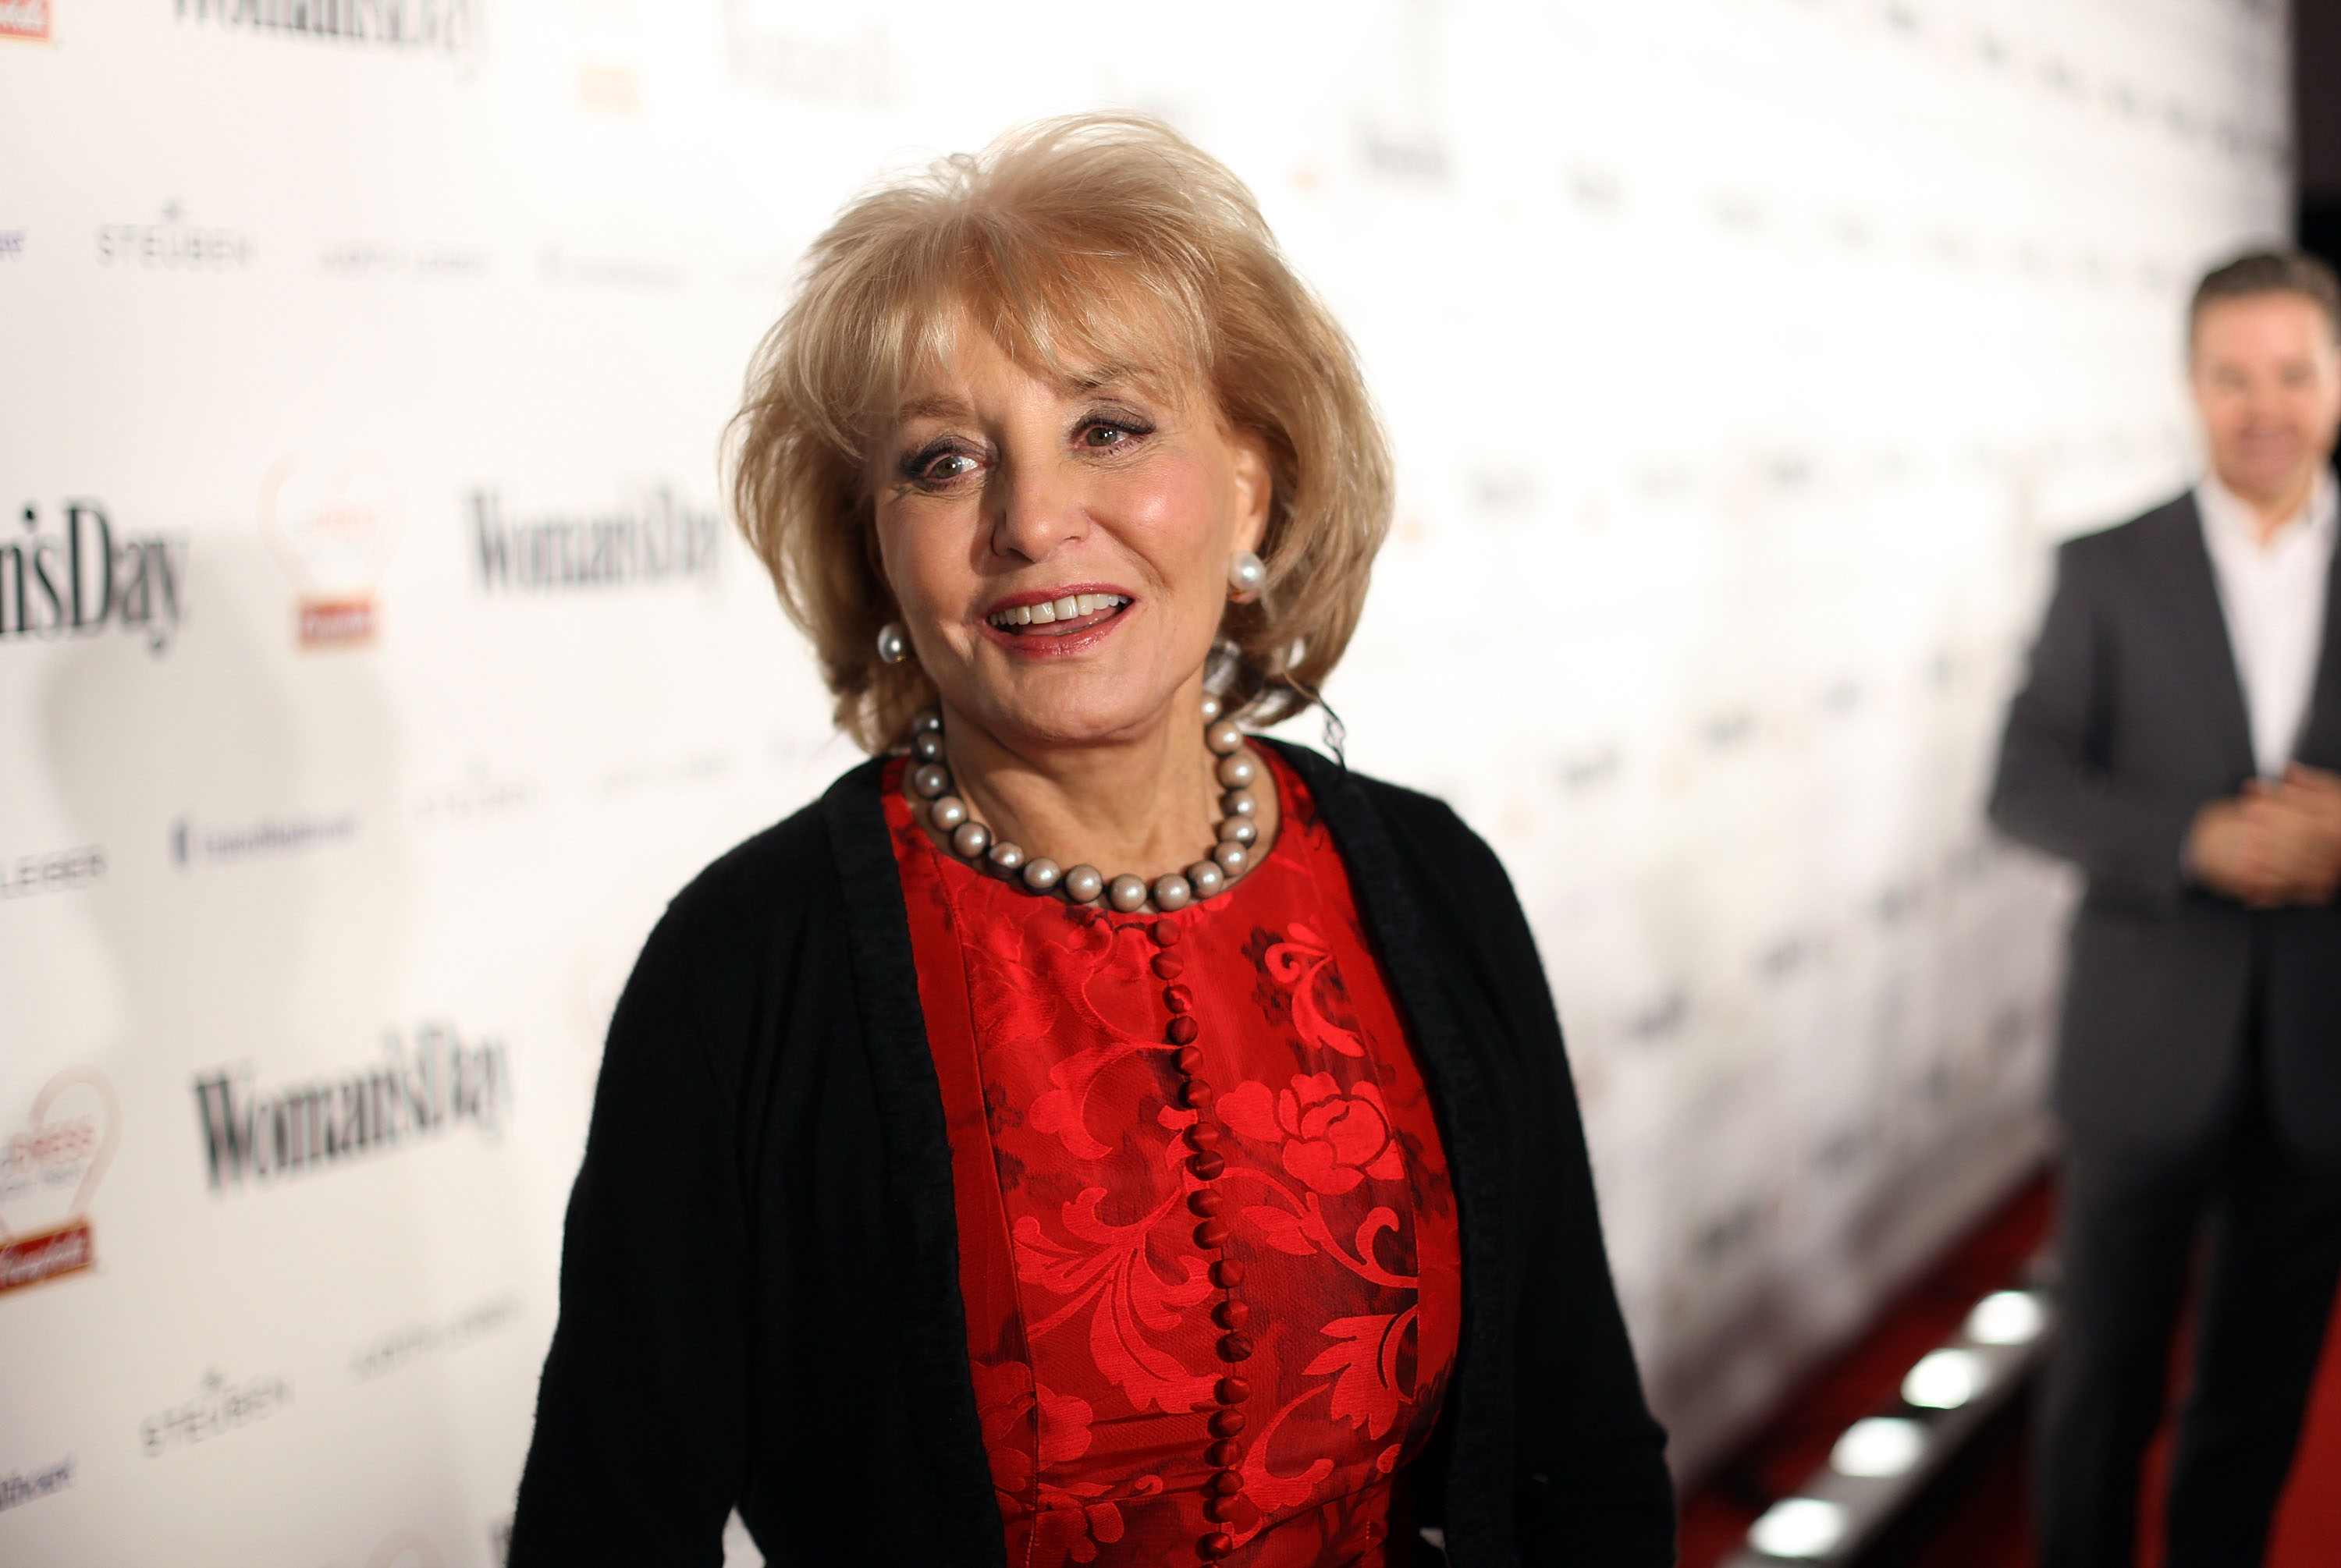 Barbara Walters at the Woman's Day 8th Annual Red Dress Awards on February 8, 2011, in New York City | Source: Getty Images